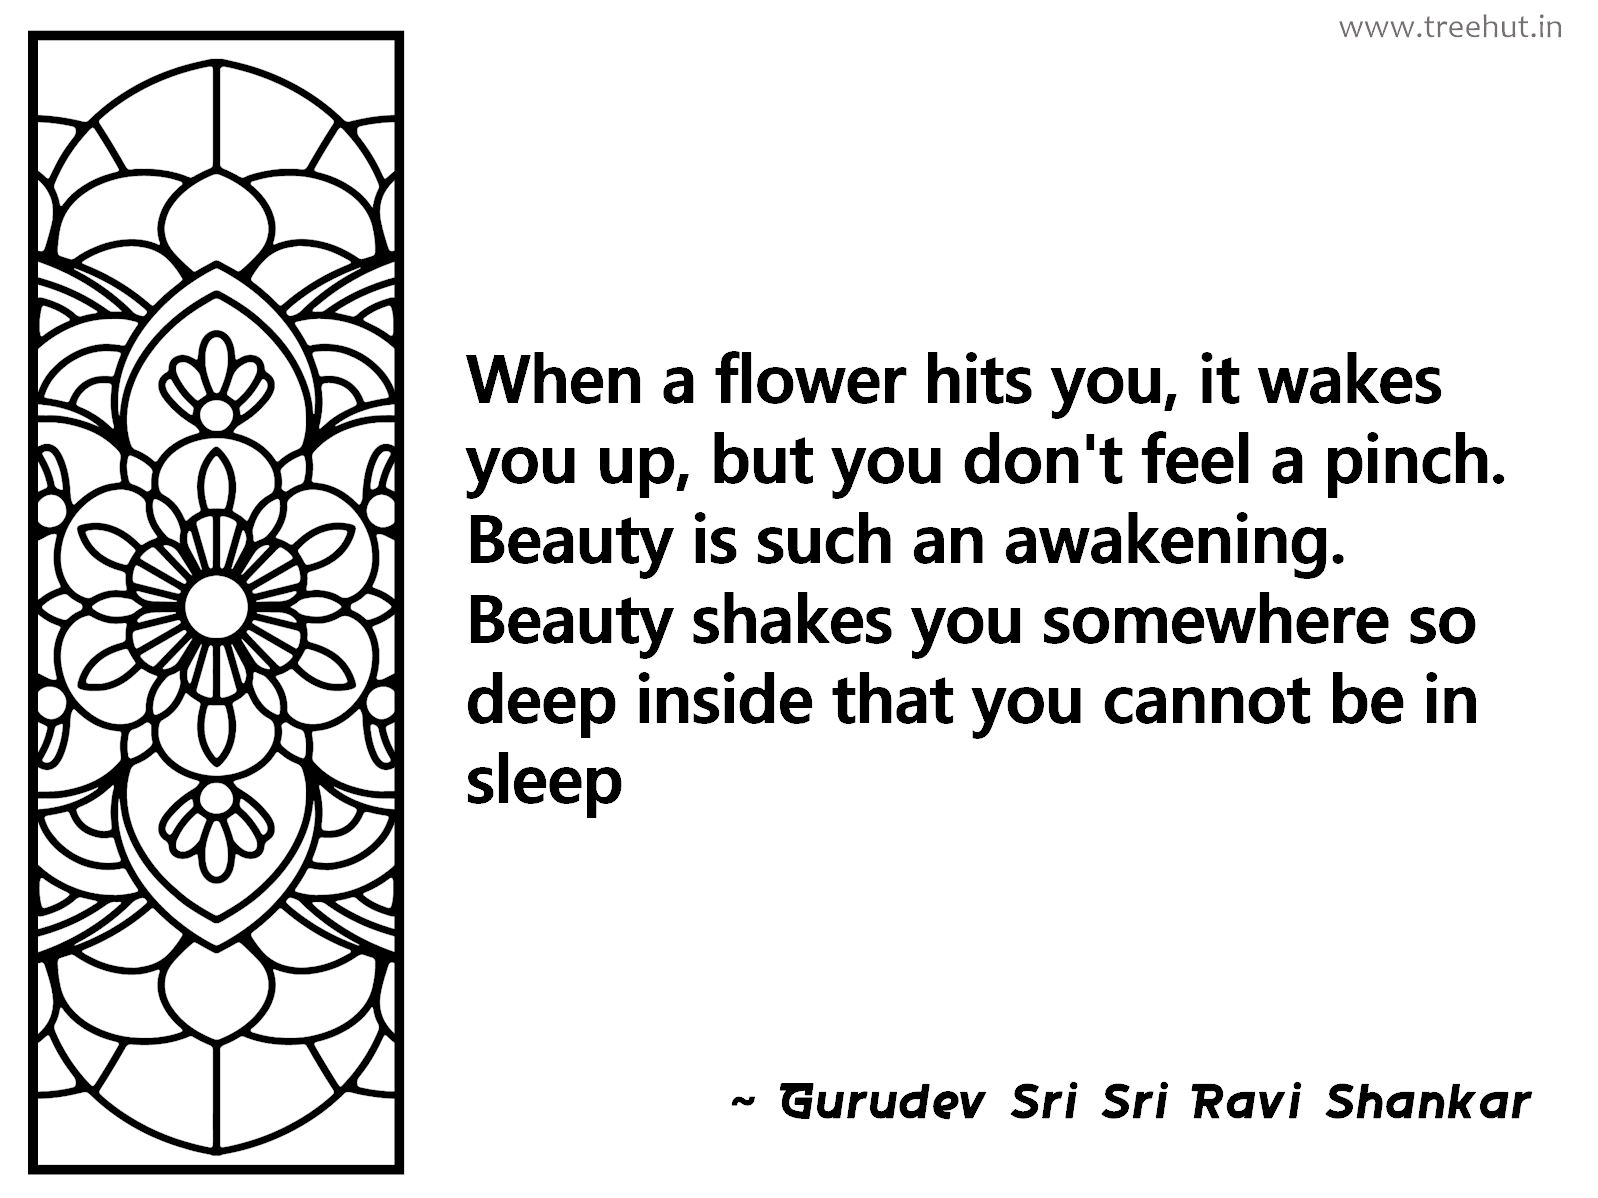 When a flower hits you, it wakes you up, but you don't feel a pinch. Beauty is such an awakening. Beauty shakes you somewhere so deep inside that you cannot be in sleep Inspirational Quote by Gurudev Sri Sri Ravi Shankar, coloring pages